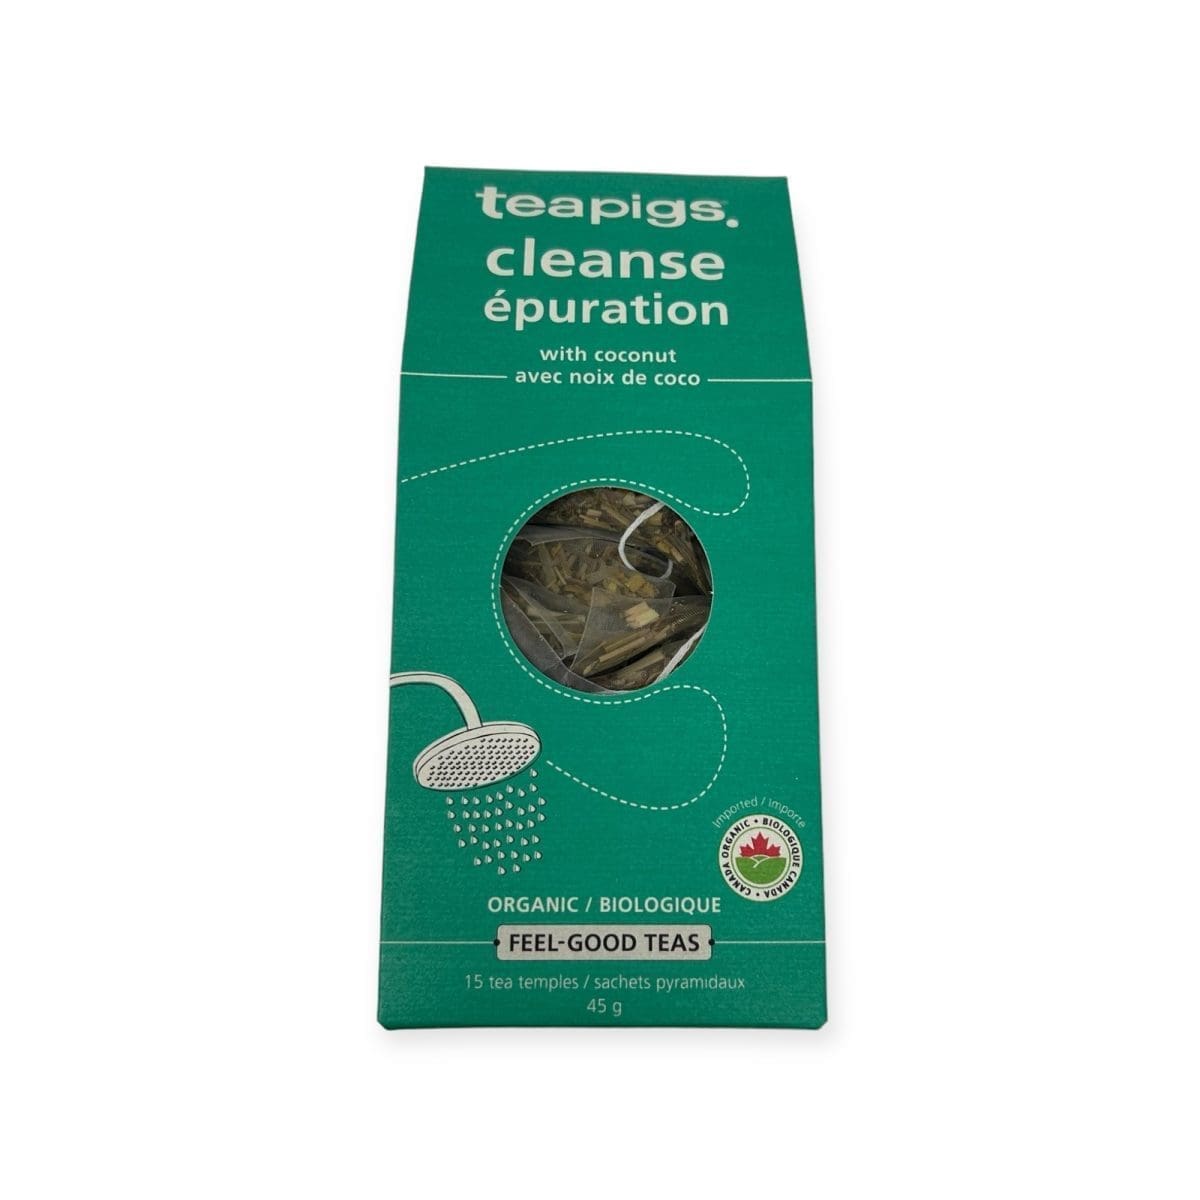 Tea Pigs Cleanse with Coconut (45g)